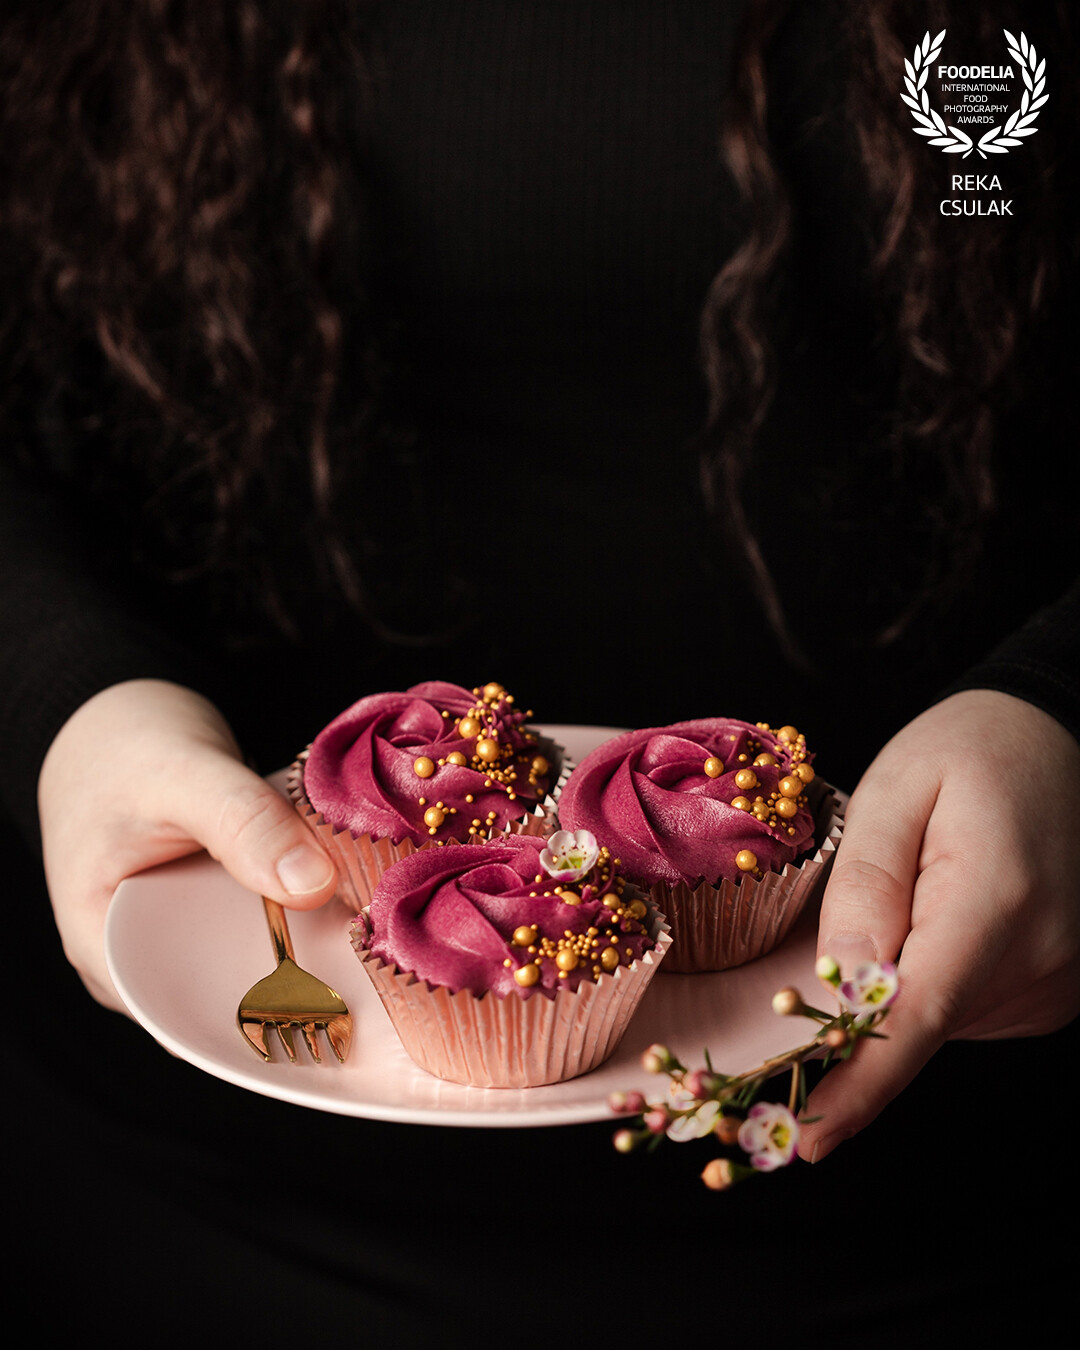 Cupcakes with vibrant pink frosting call for Spring, and are even more relatable by the human touch.